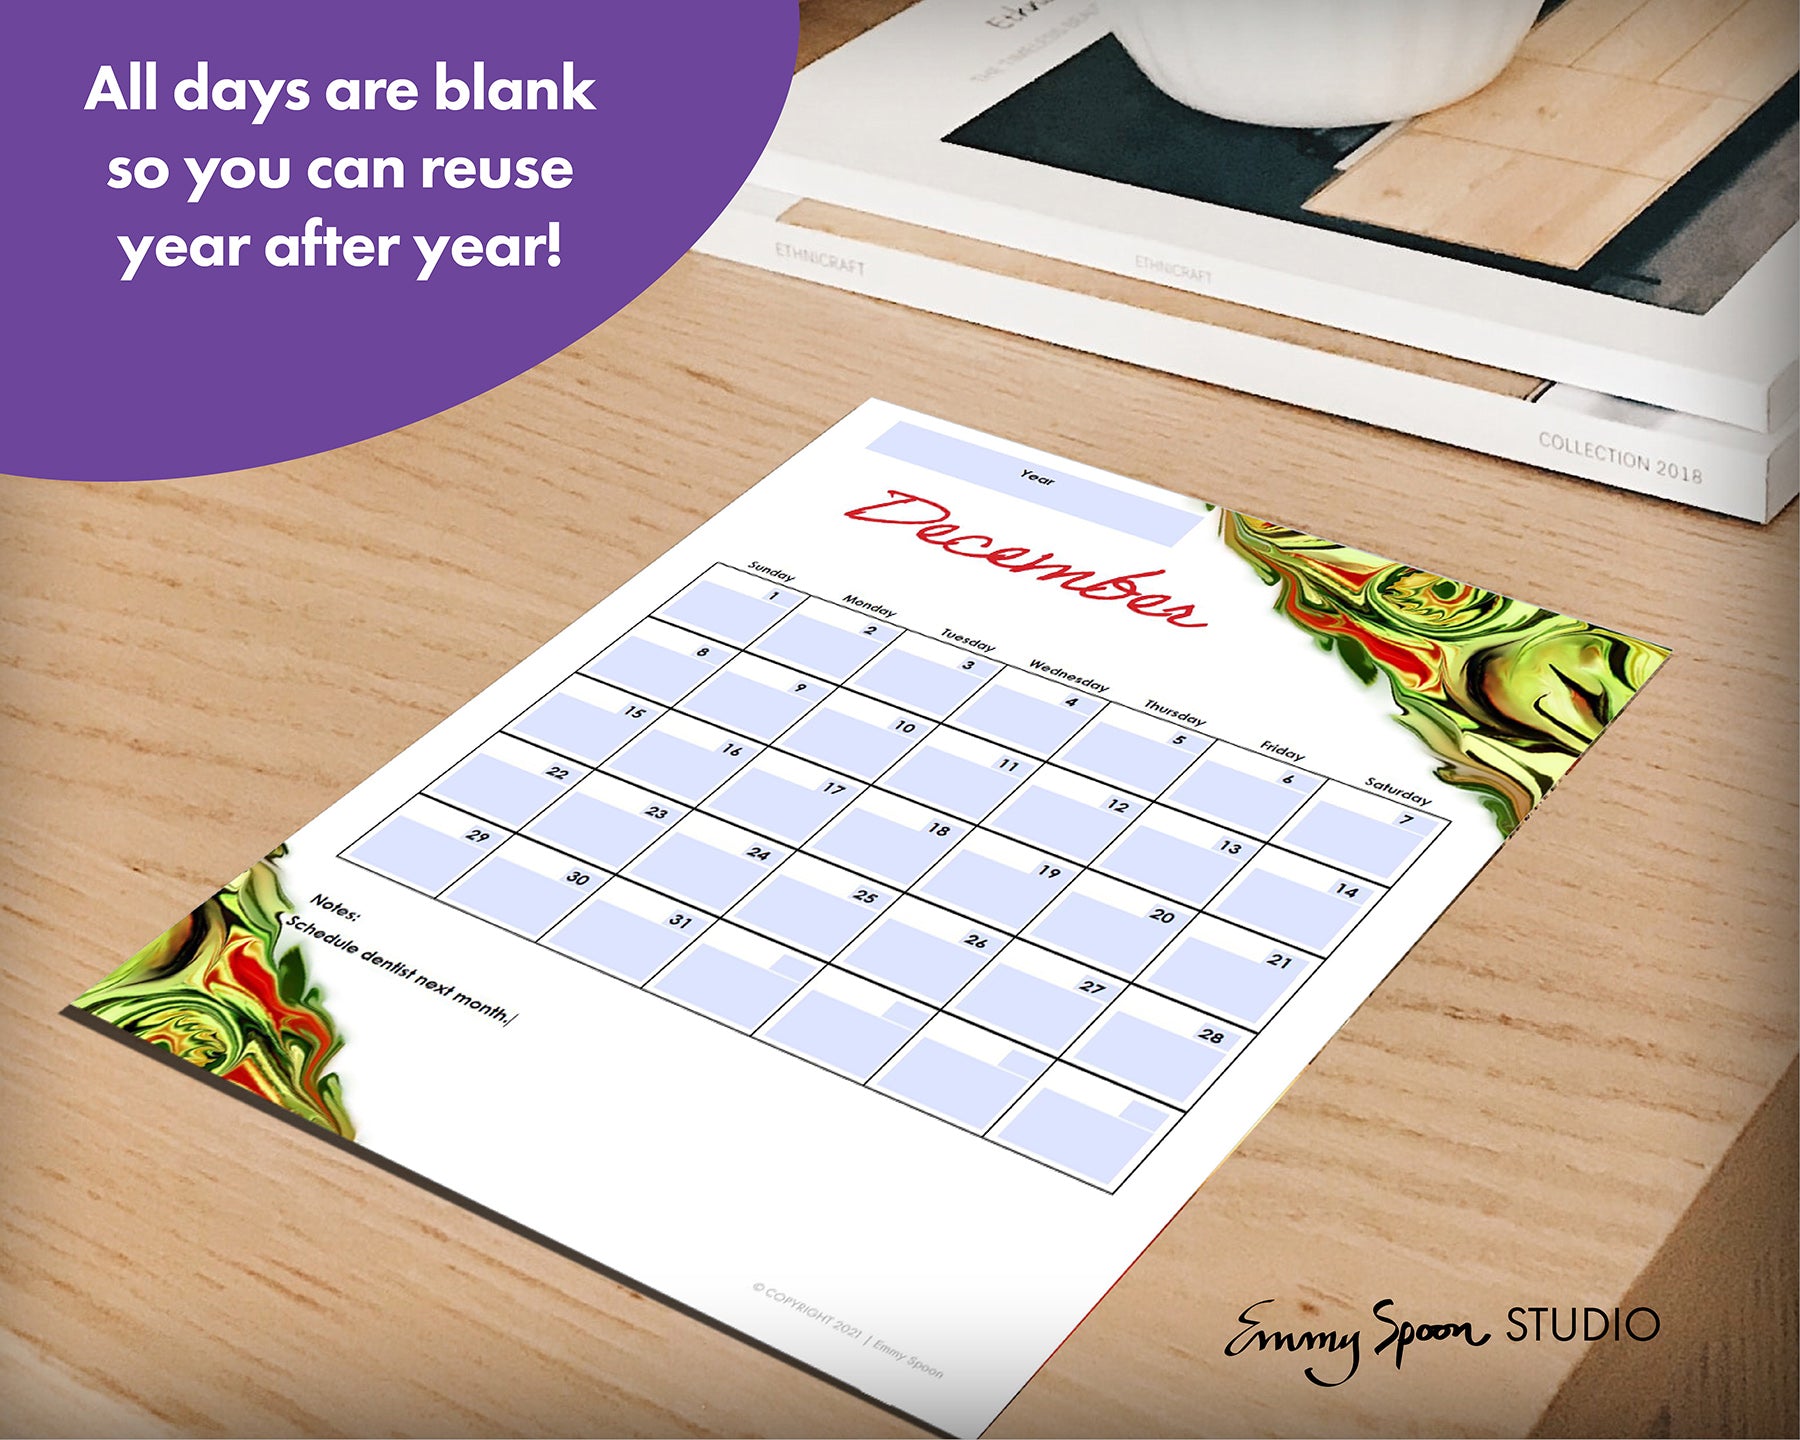 All days are blank so you can reuse year after year!